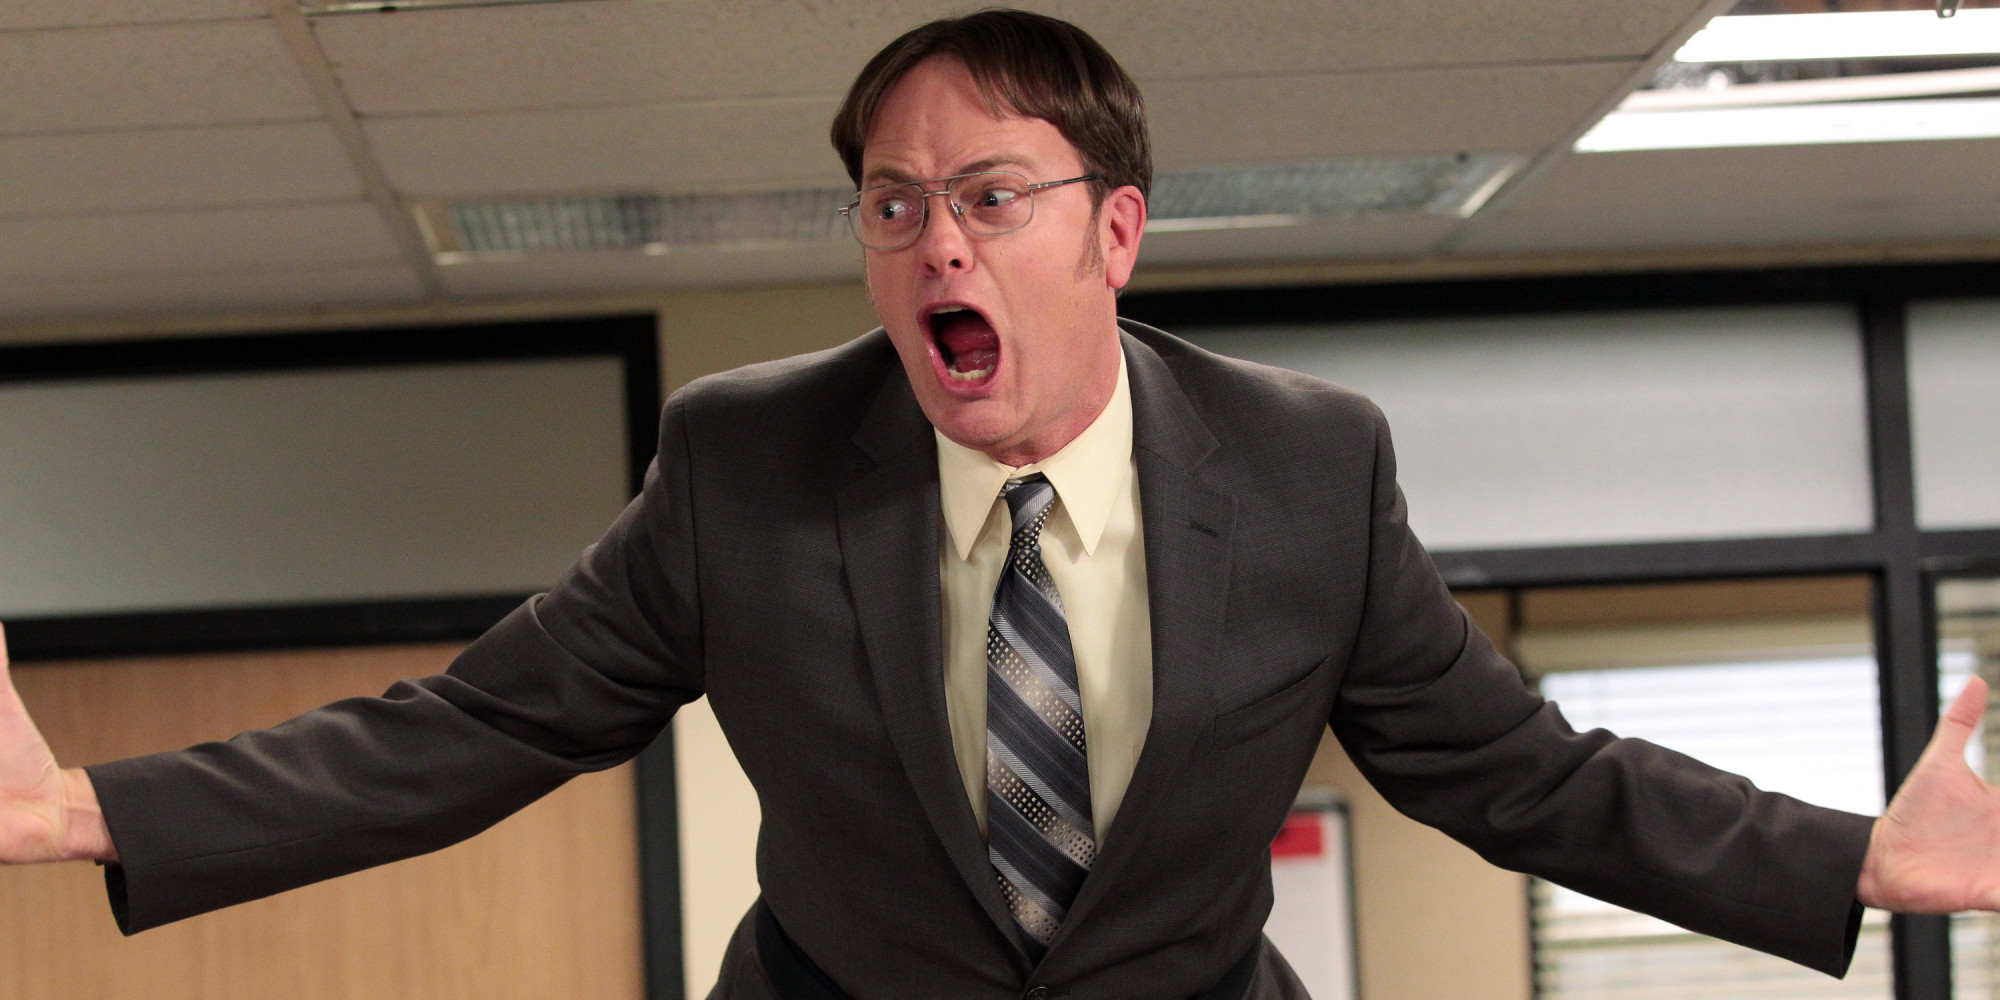 dwight schrute yelling angry Memes - Imgflip